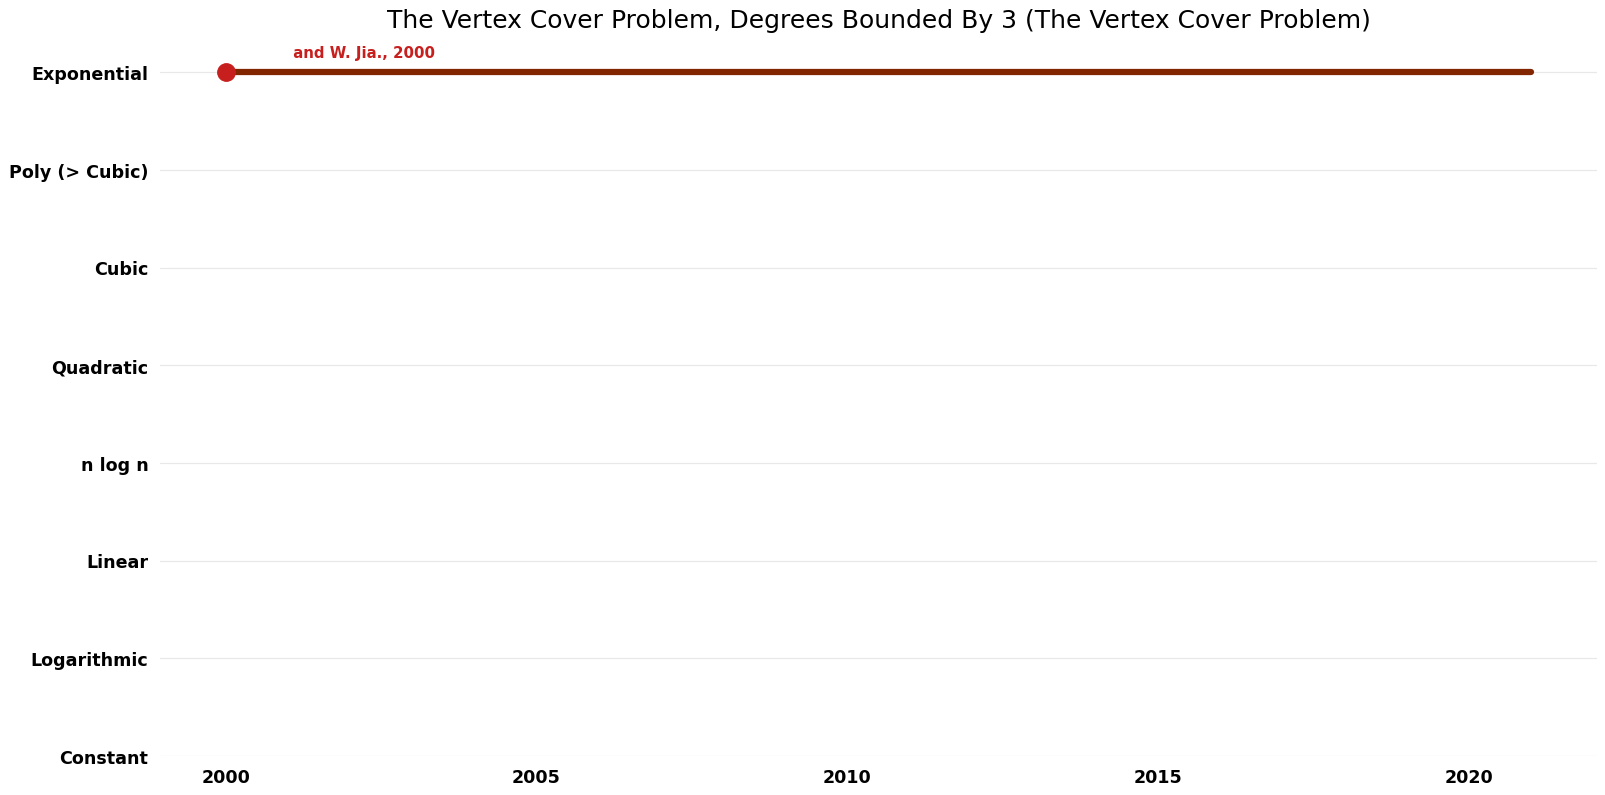 The Vertex Cover Problem - The Vertex Cover Problem, Degrees Bounded By 3 - Time.png